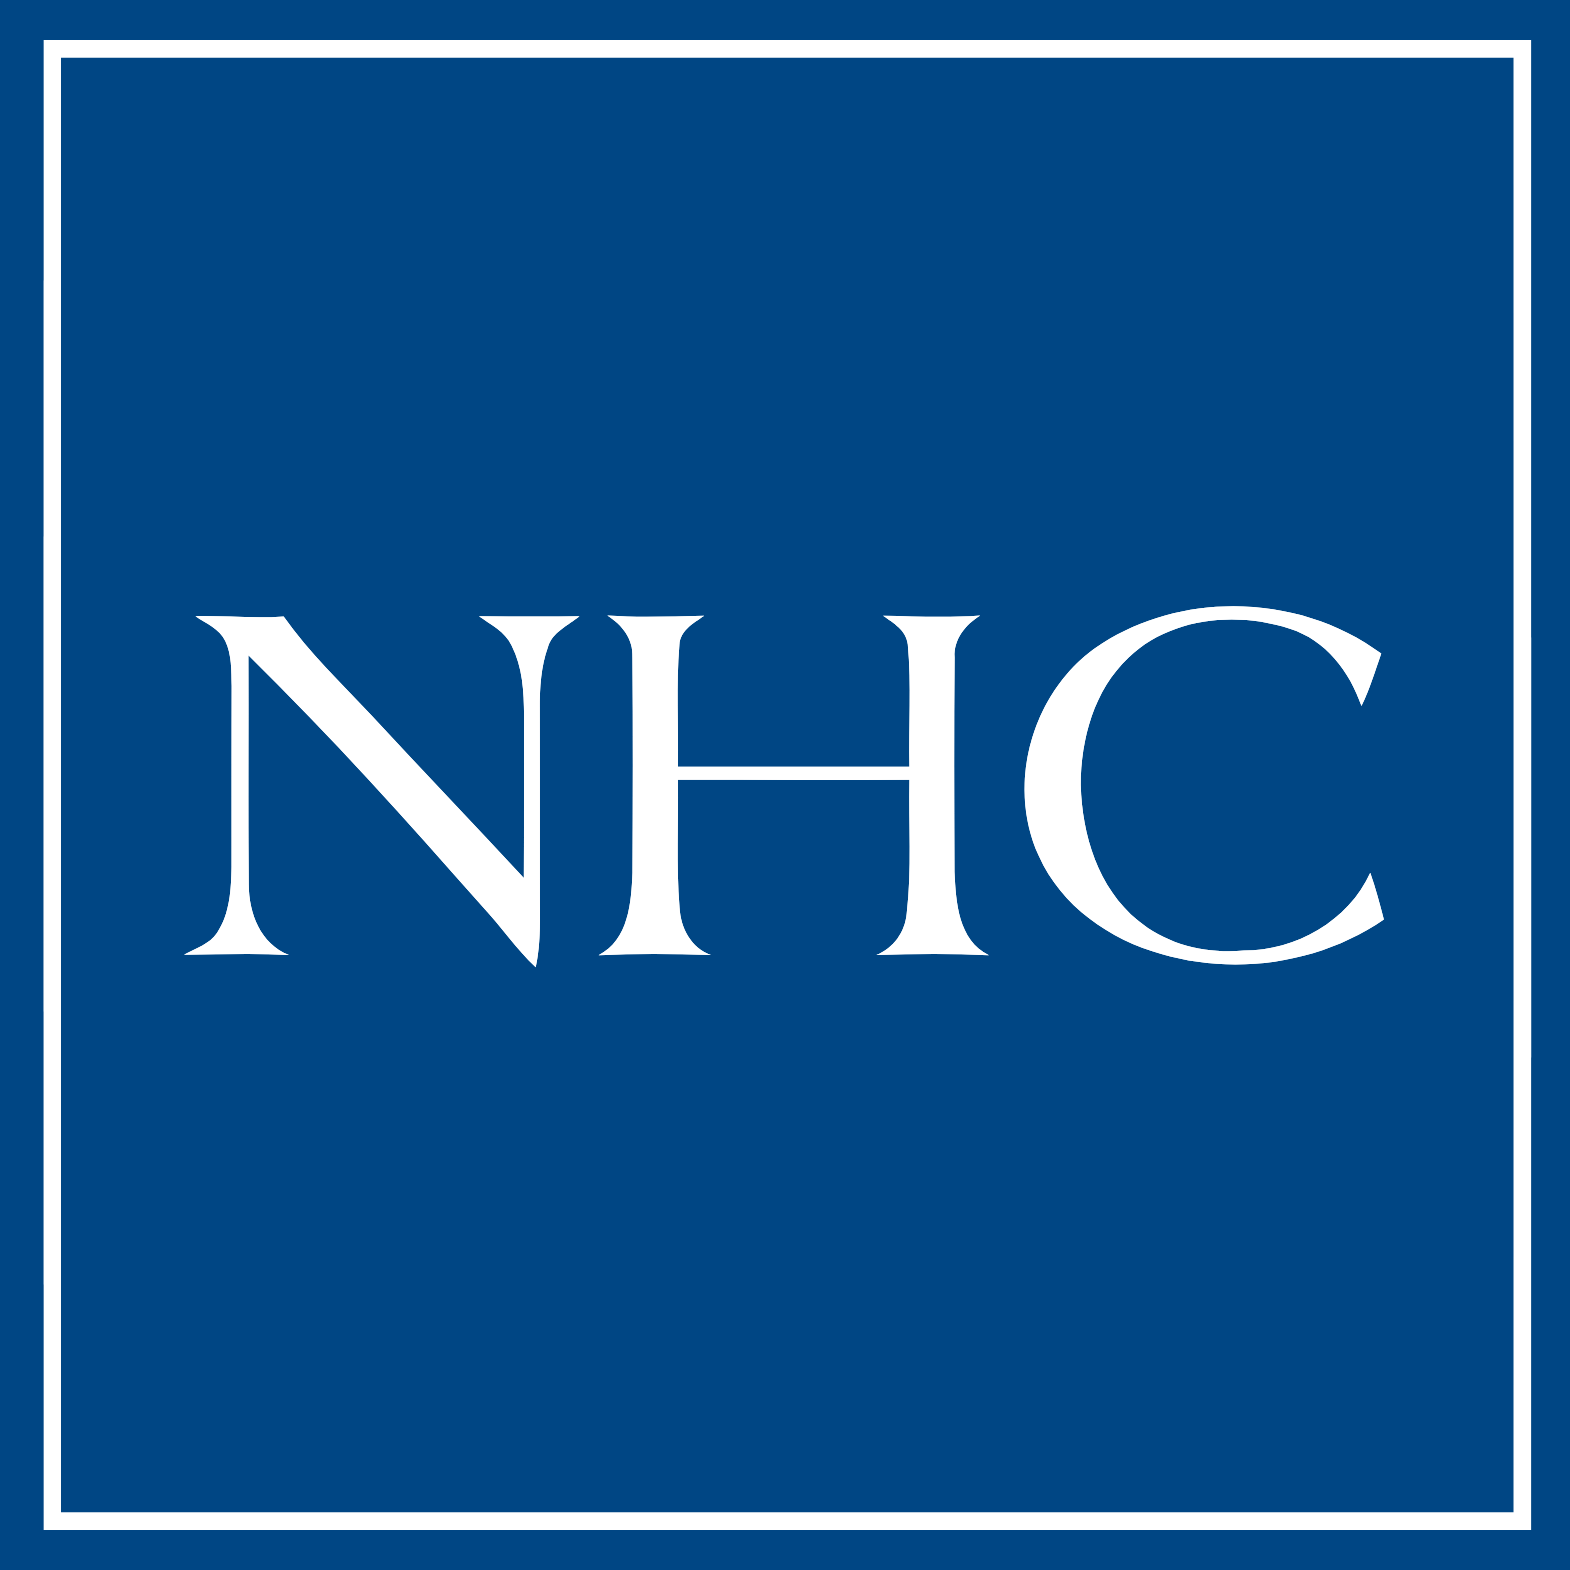 National Healthcare logo in transparent PNG and vectorized SVG formats